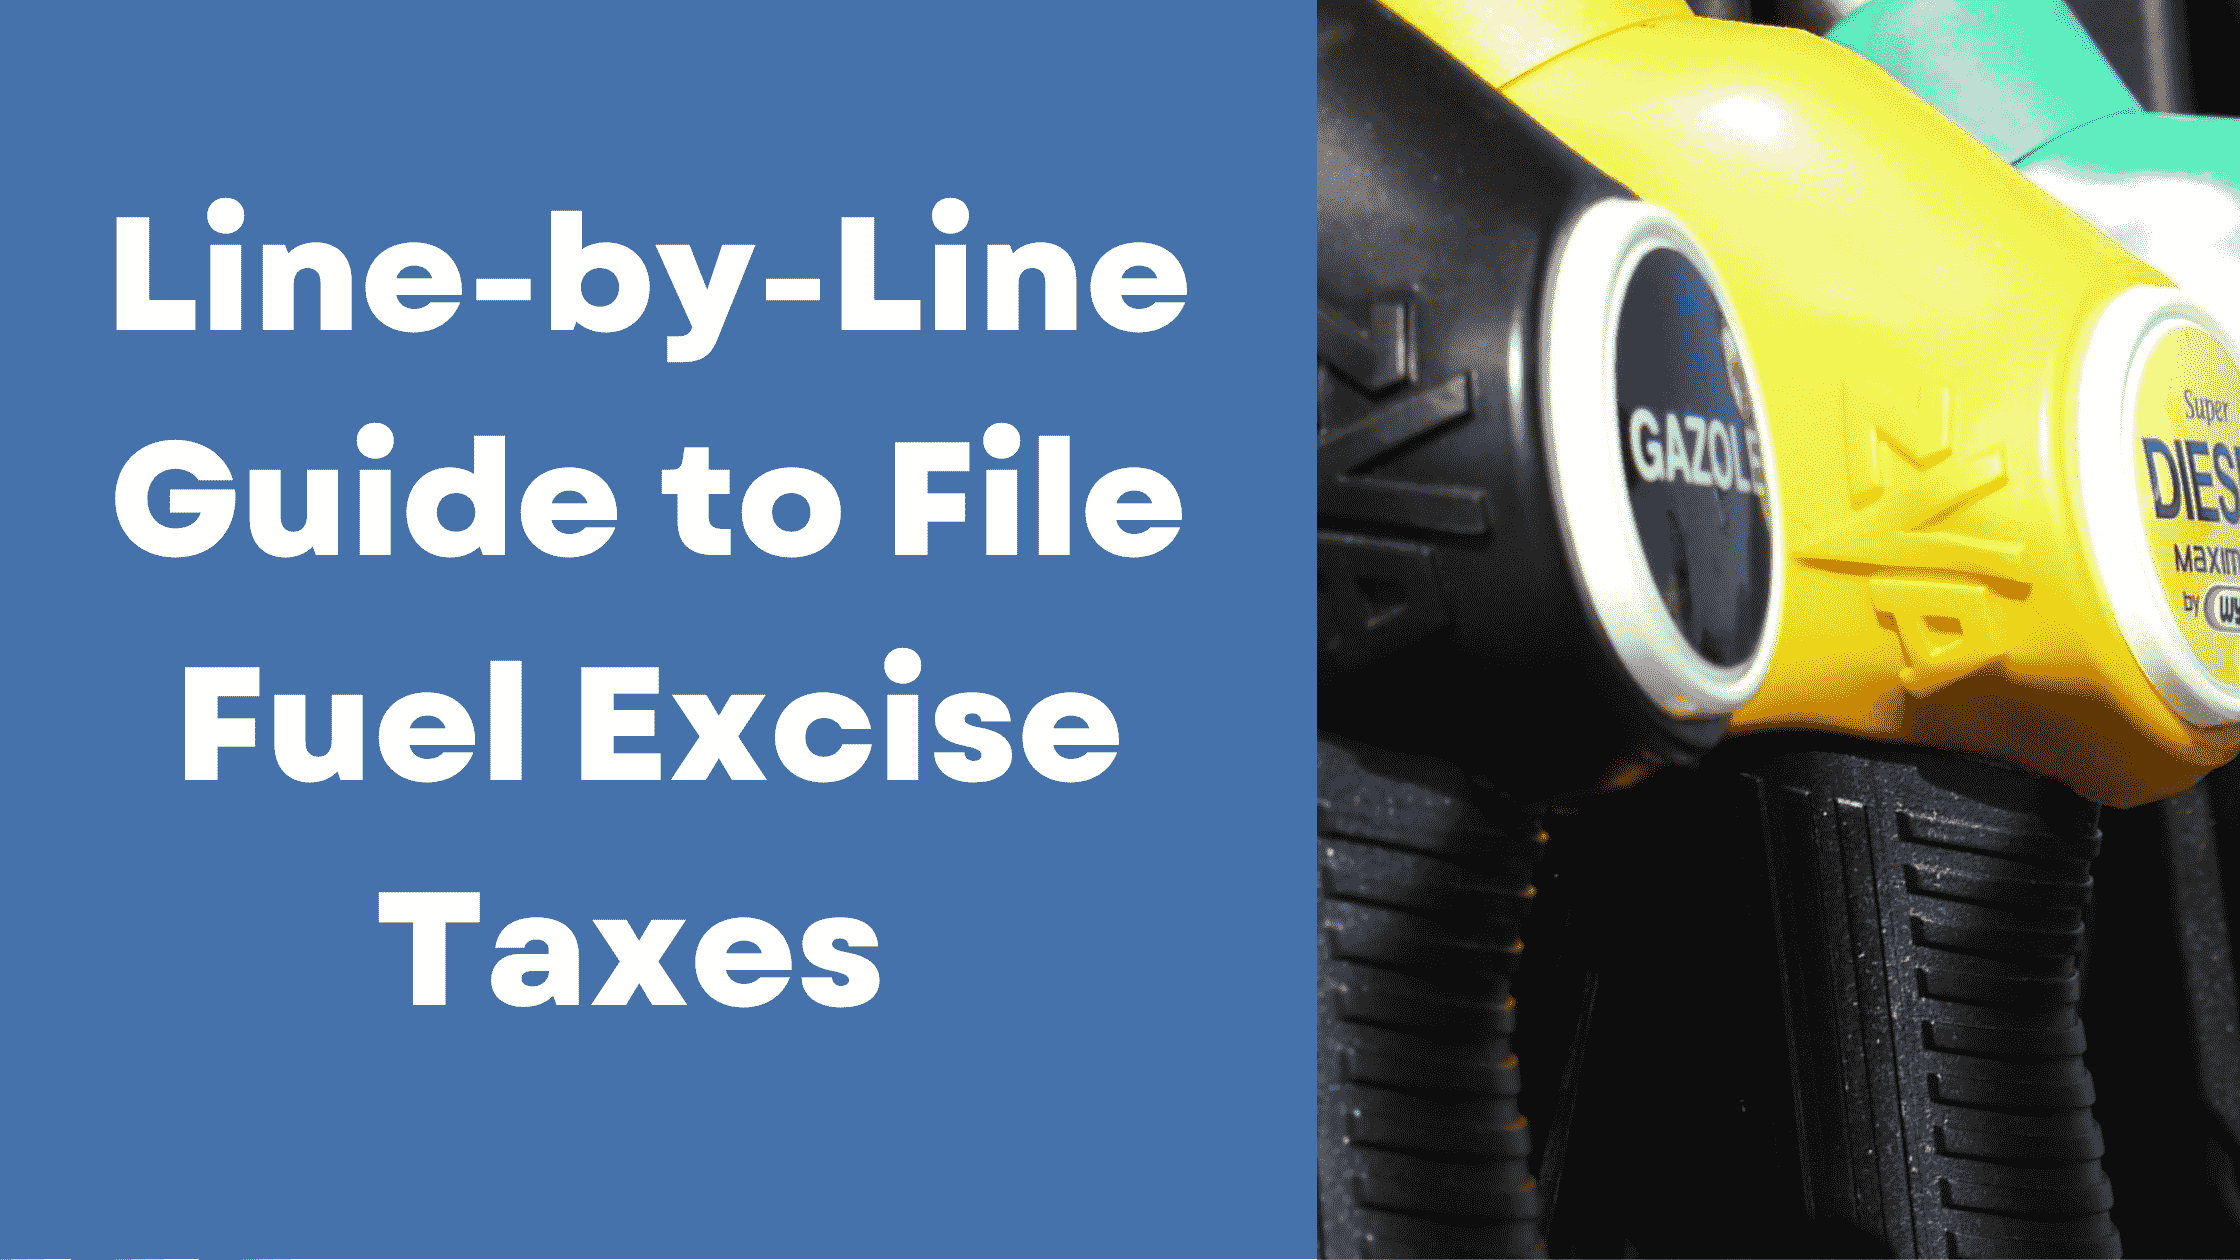 Line-by-Line Guide to file Fuel Excise Taxes | Simple 720